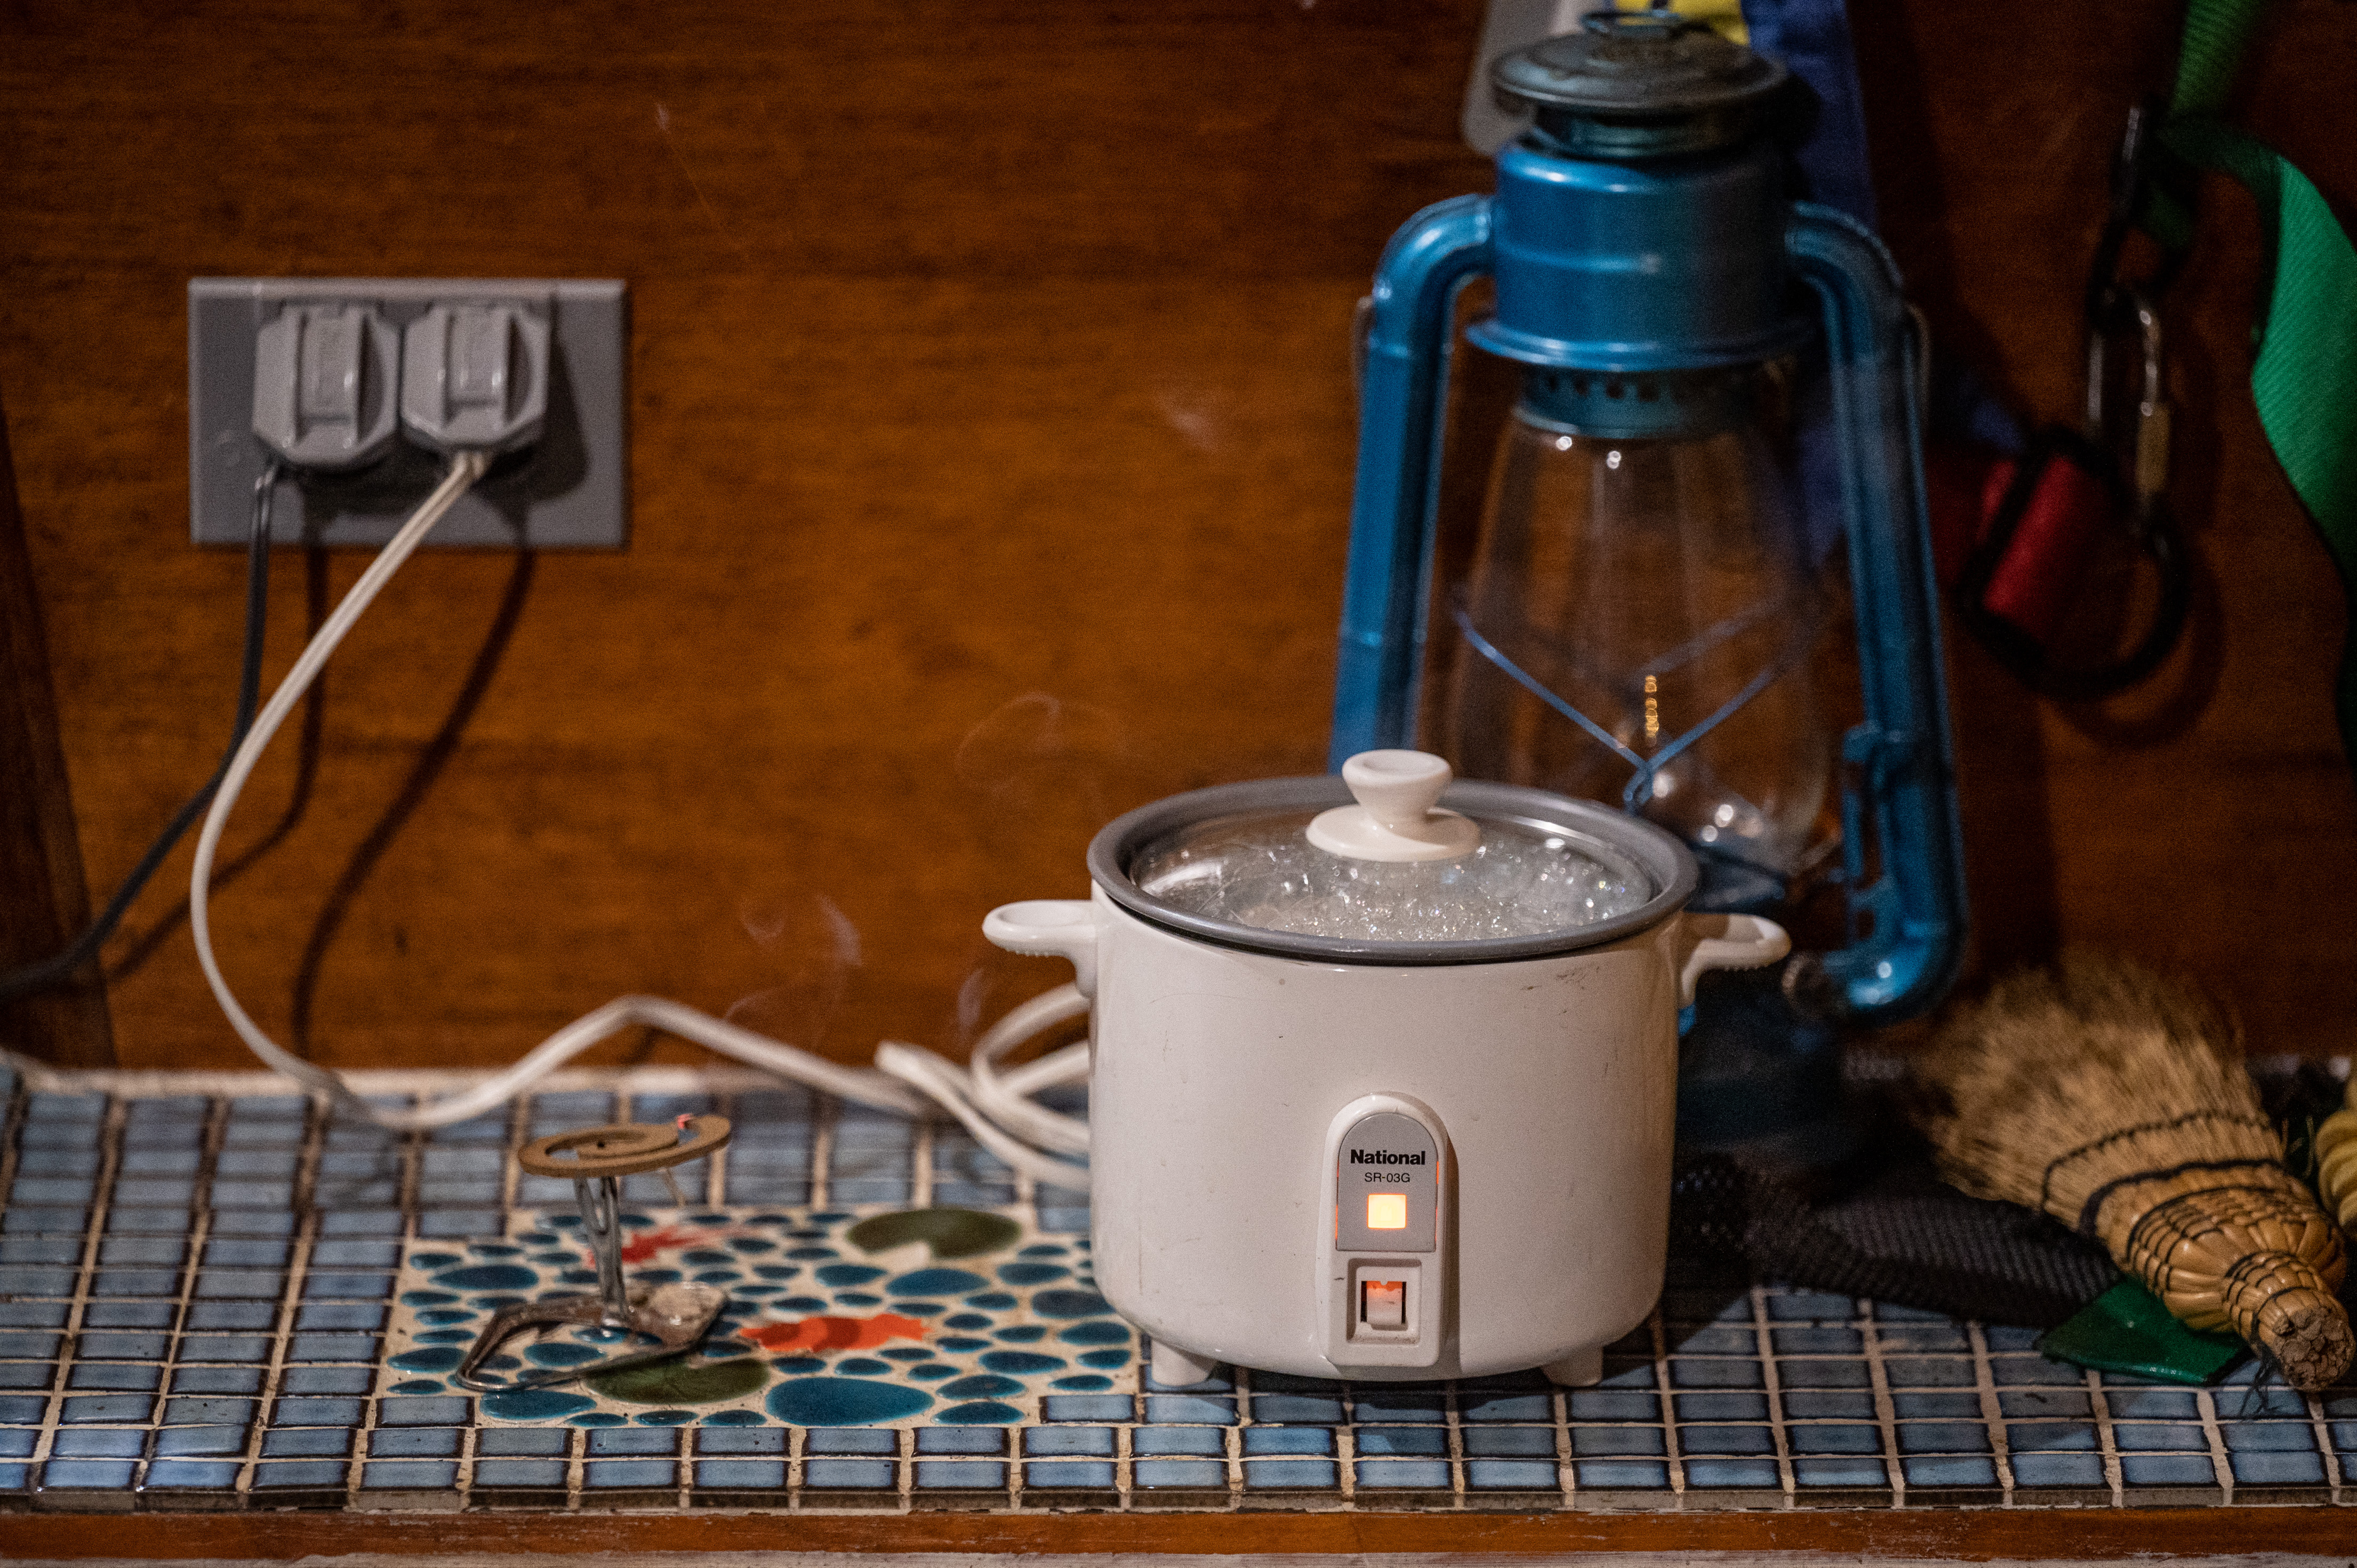 How students can benefit from using a rice cooker